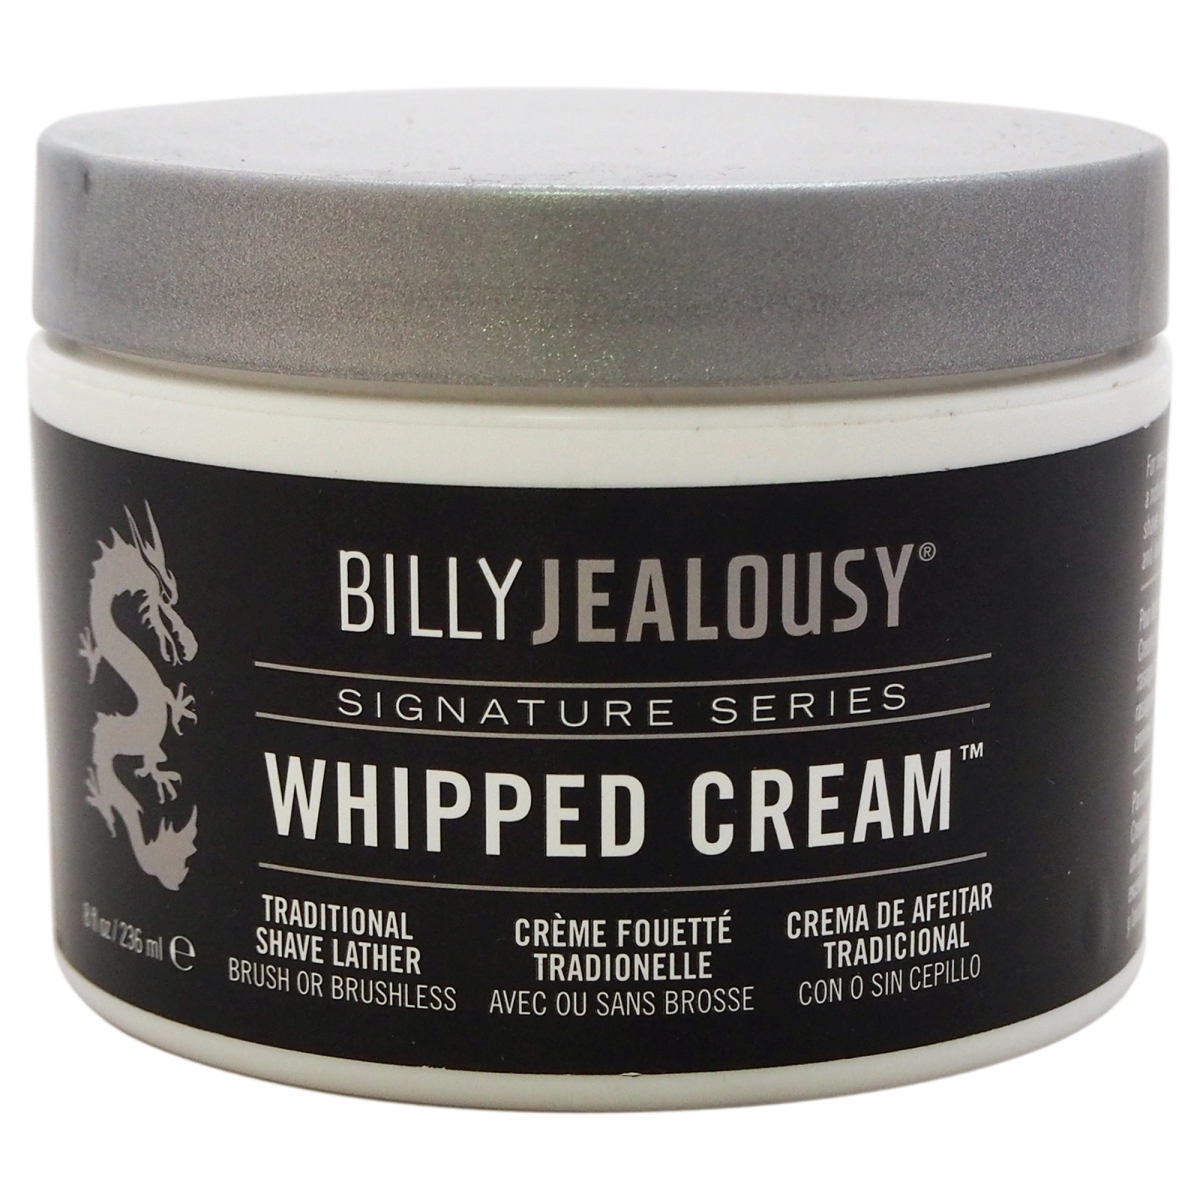 M-sc-1171 Whipped Cream Traditional Shave Lather Cream For Men - 8 Oz